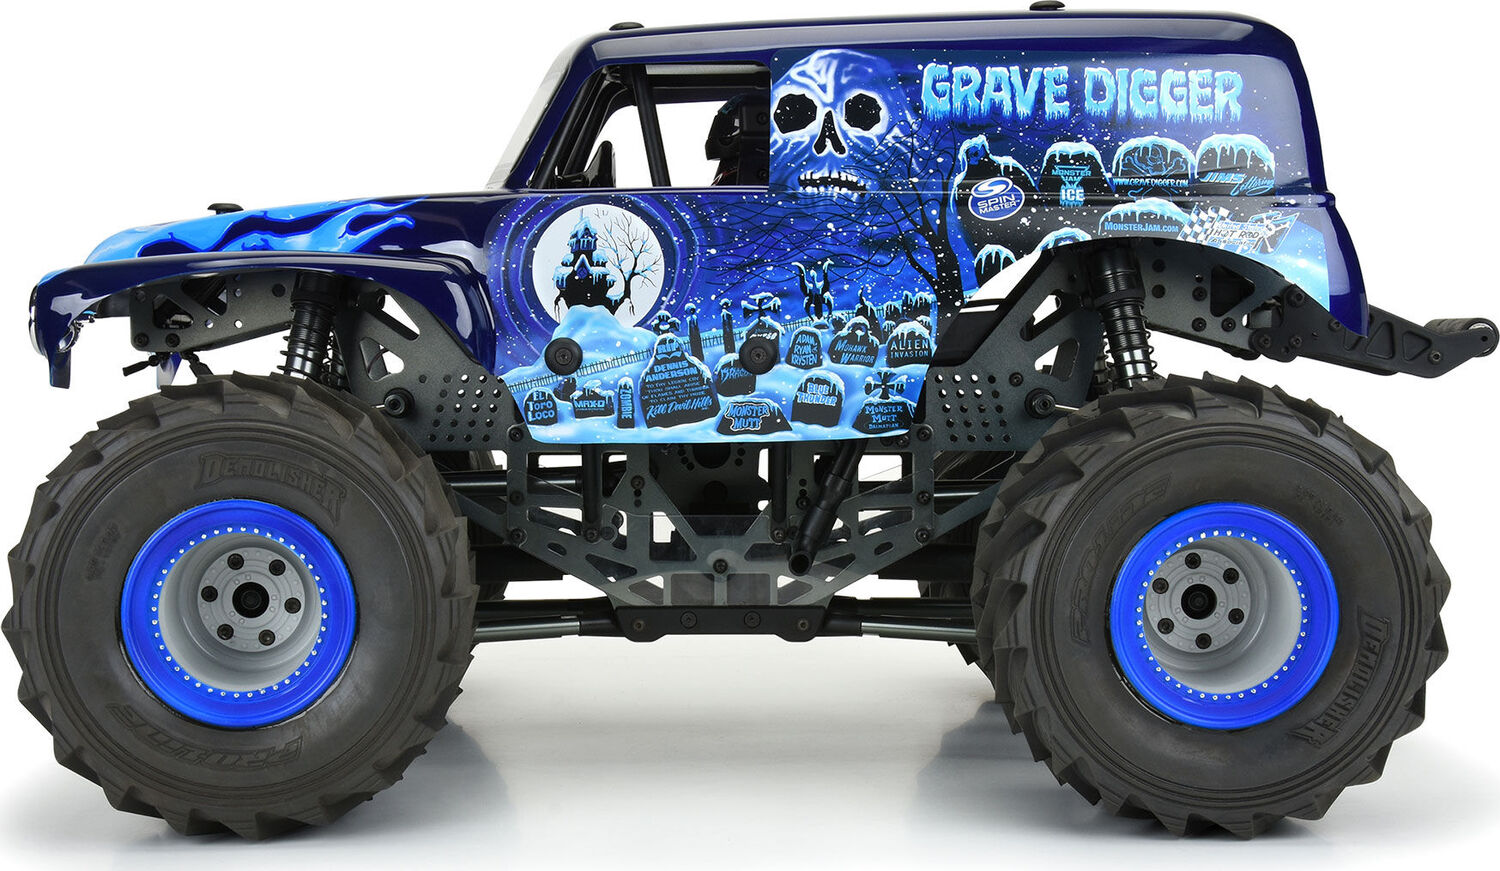 1/10 Grave Digger Ice (Blue) Painted Body Set: LMT